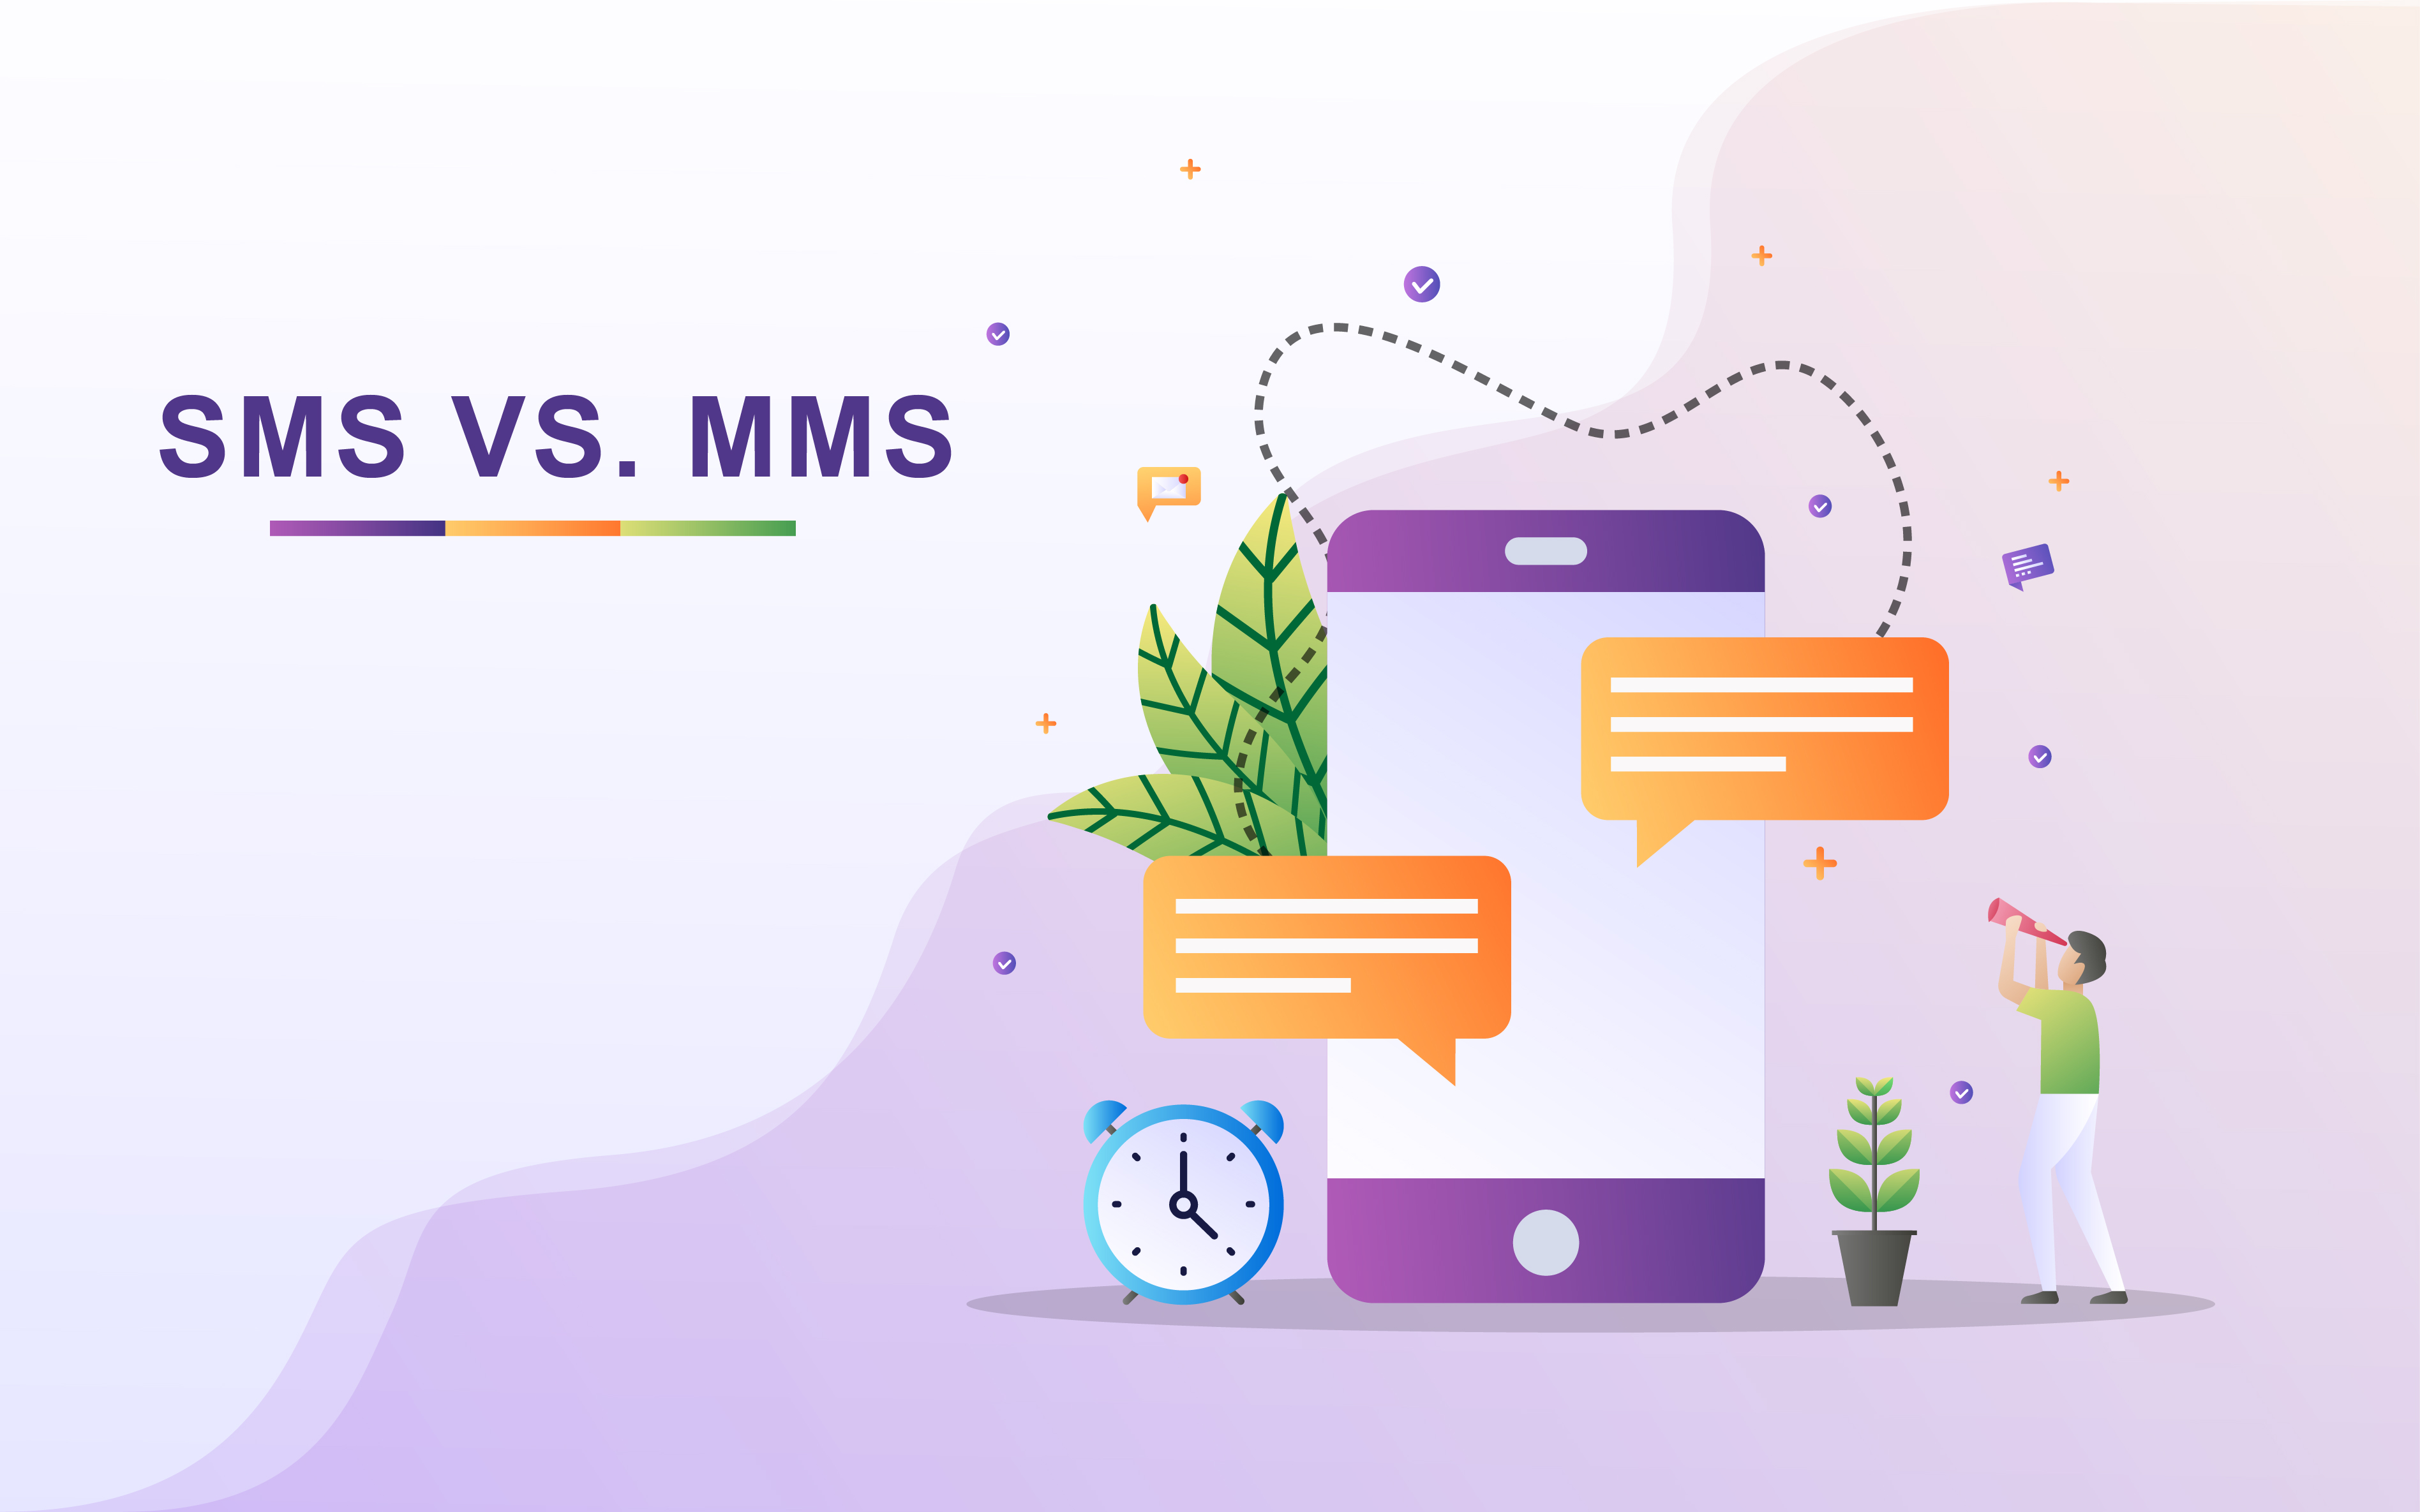 MMS vs SMS: When Should You Use SMS and MMS for Marketing?